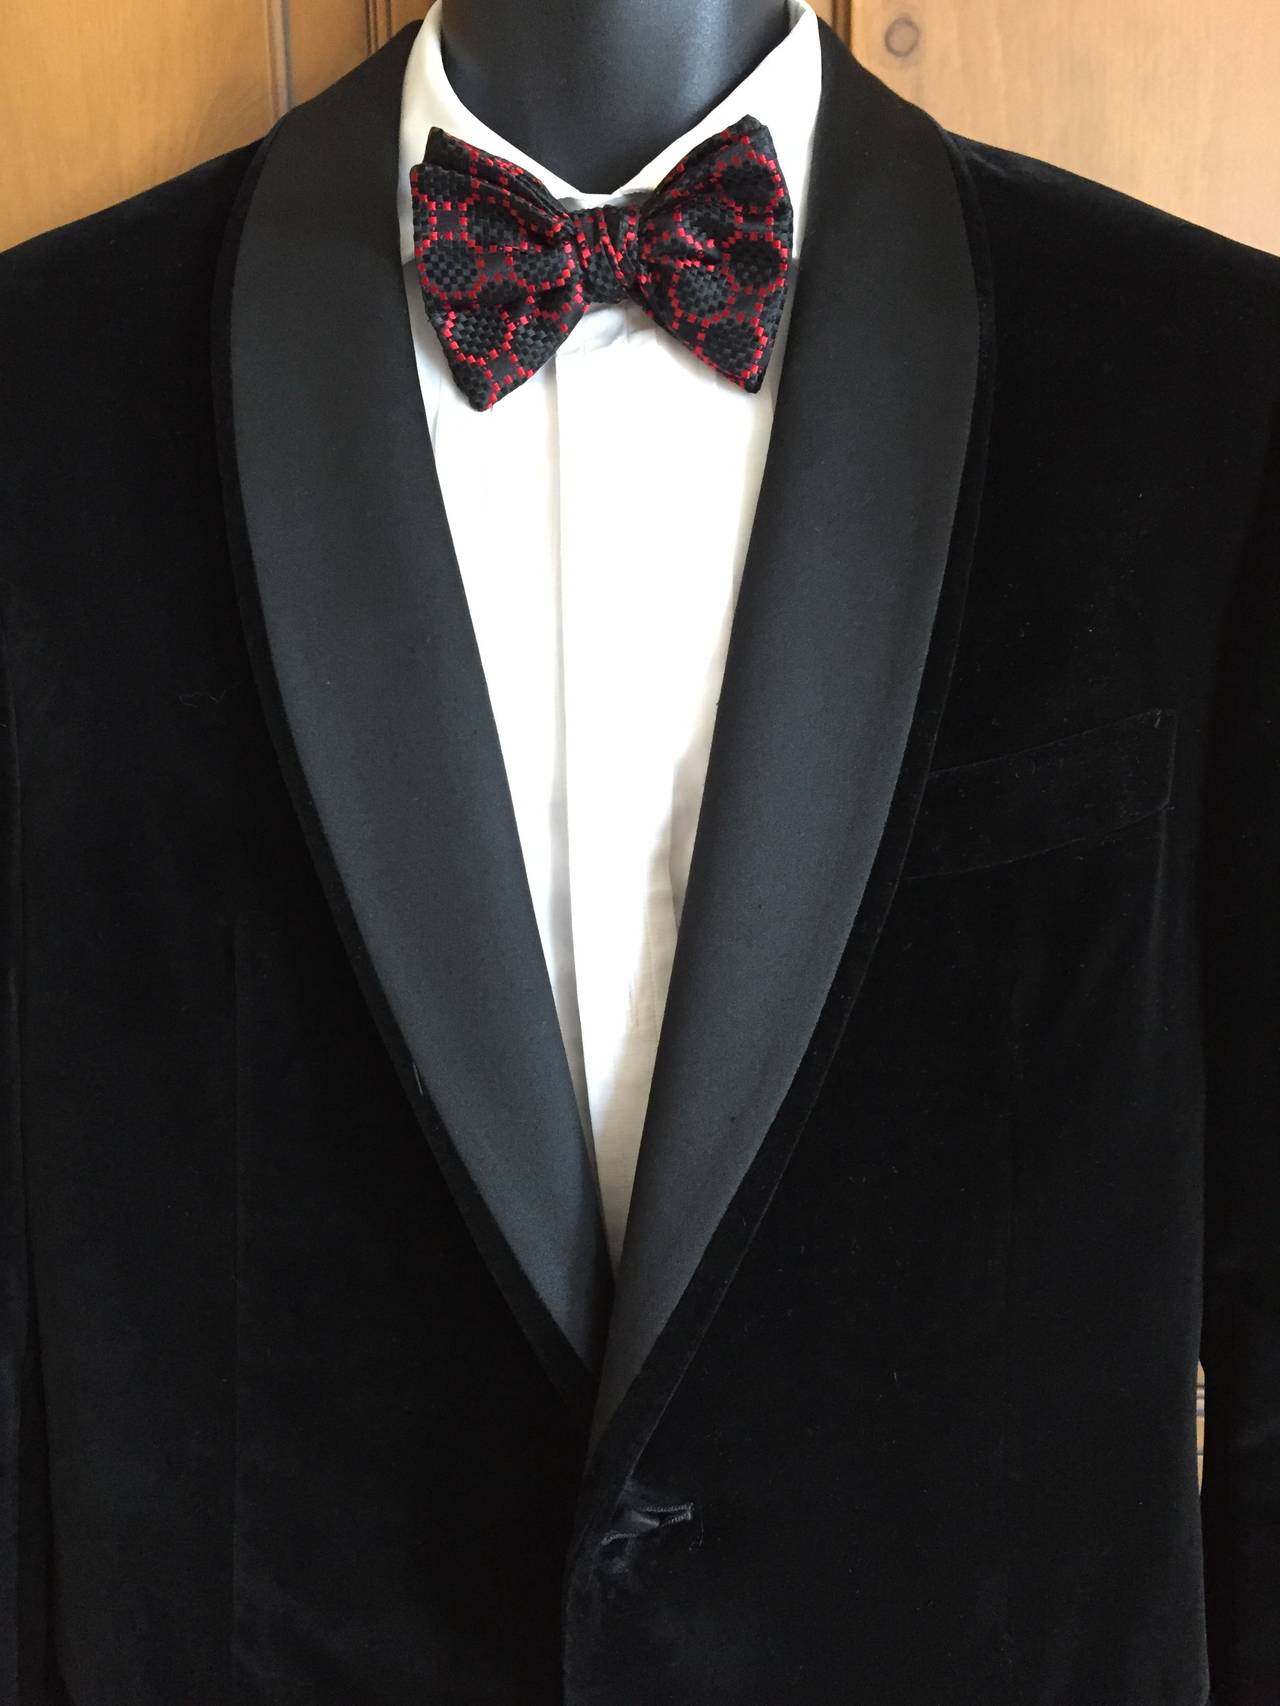 Tom Ford for Gucci Velvet Smoking Jacket with Satin Shawl Collar Lapels.
Lined in Gucci GG monogram Bemberg satin, this is a classic.